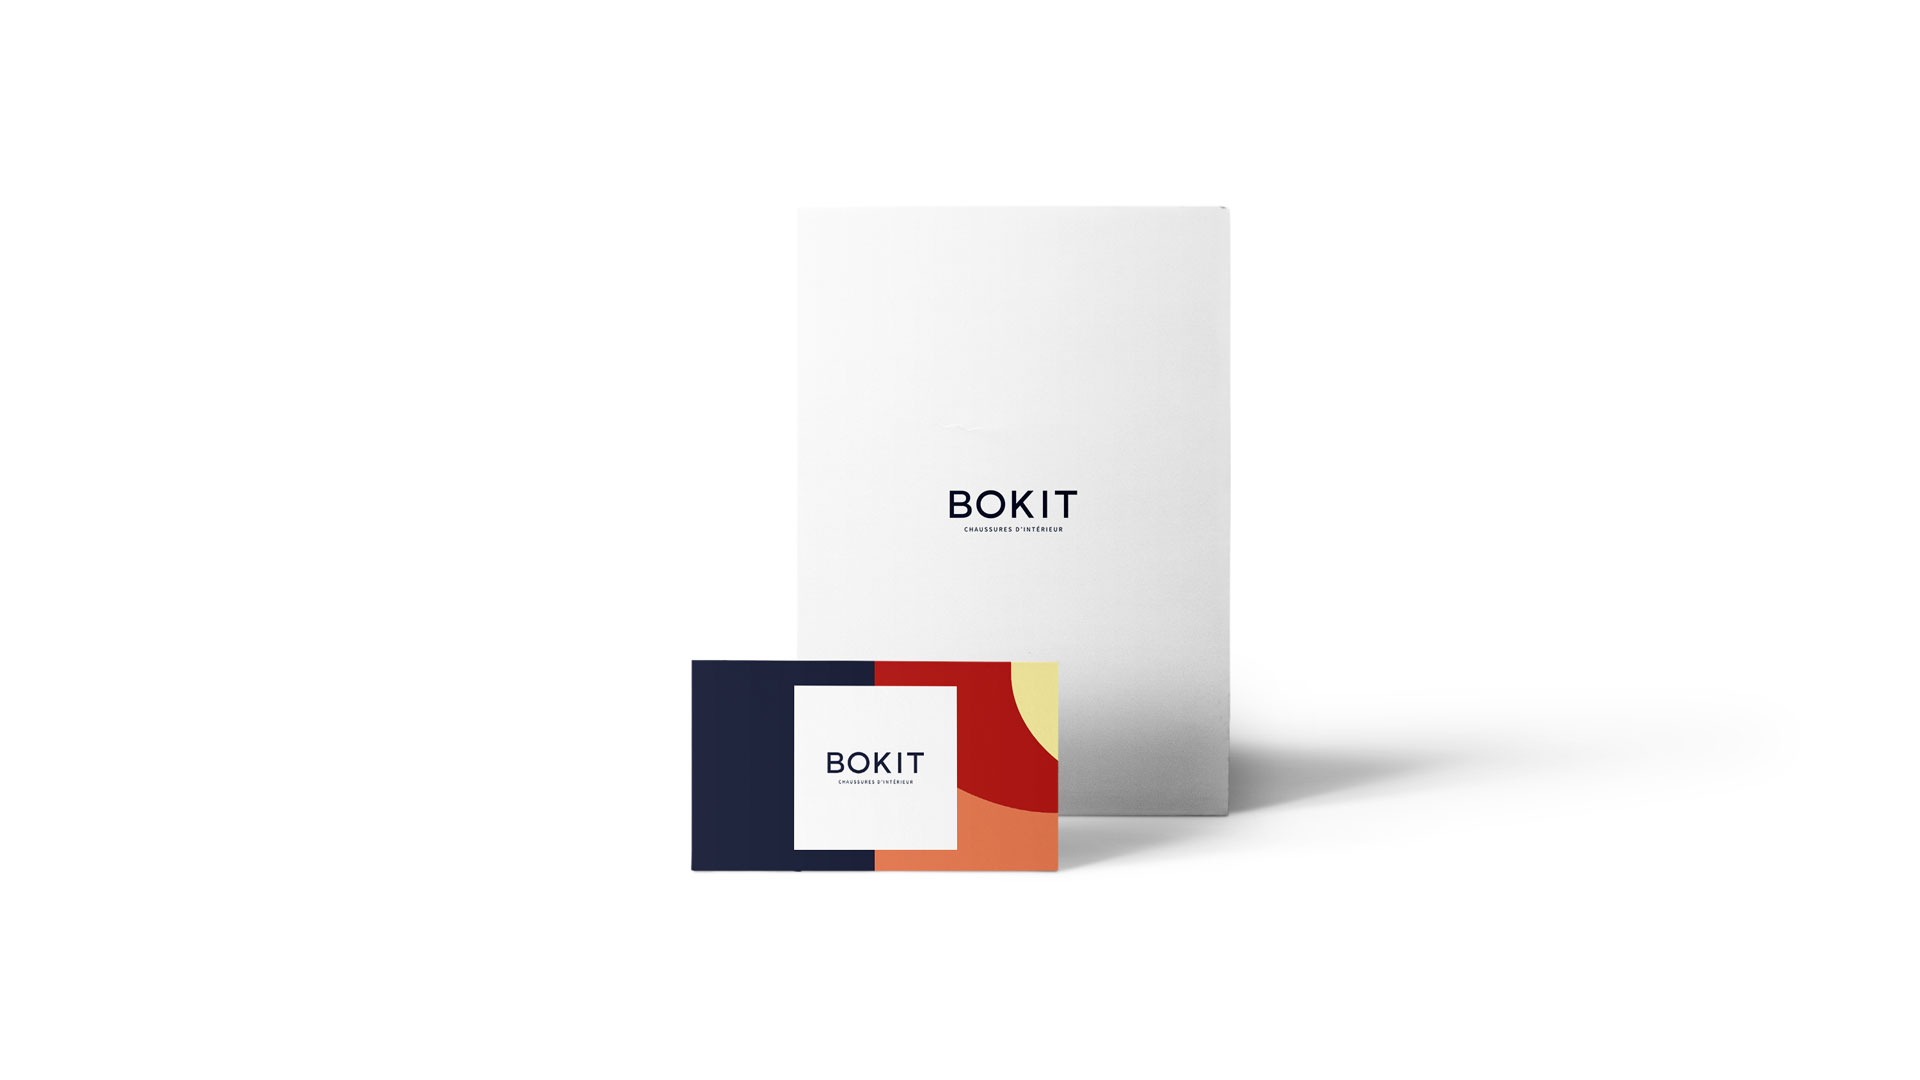 Bokit's colorful business cards